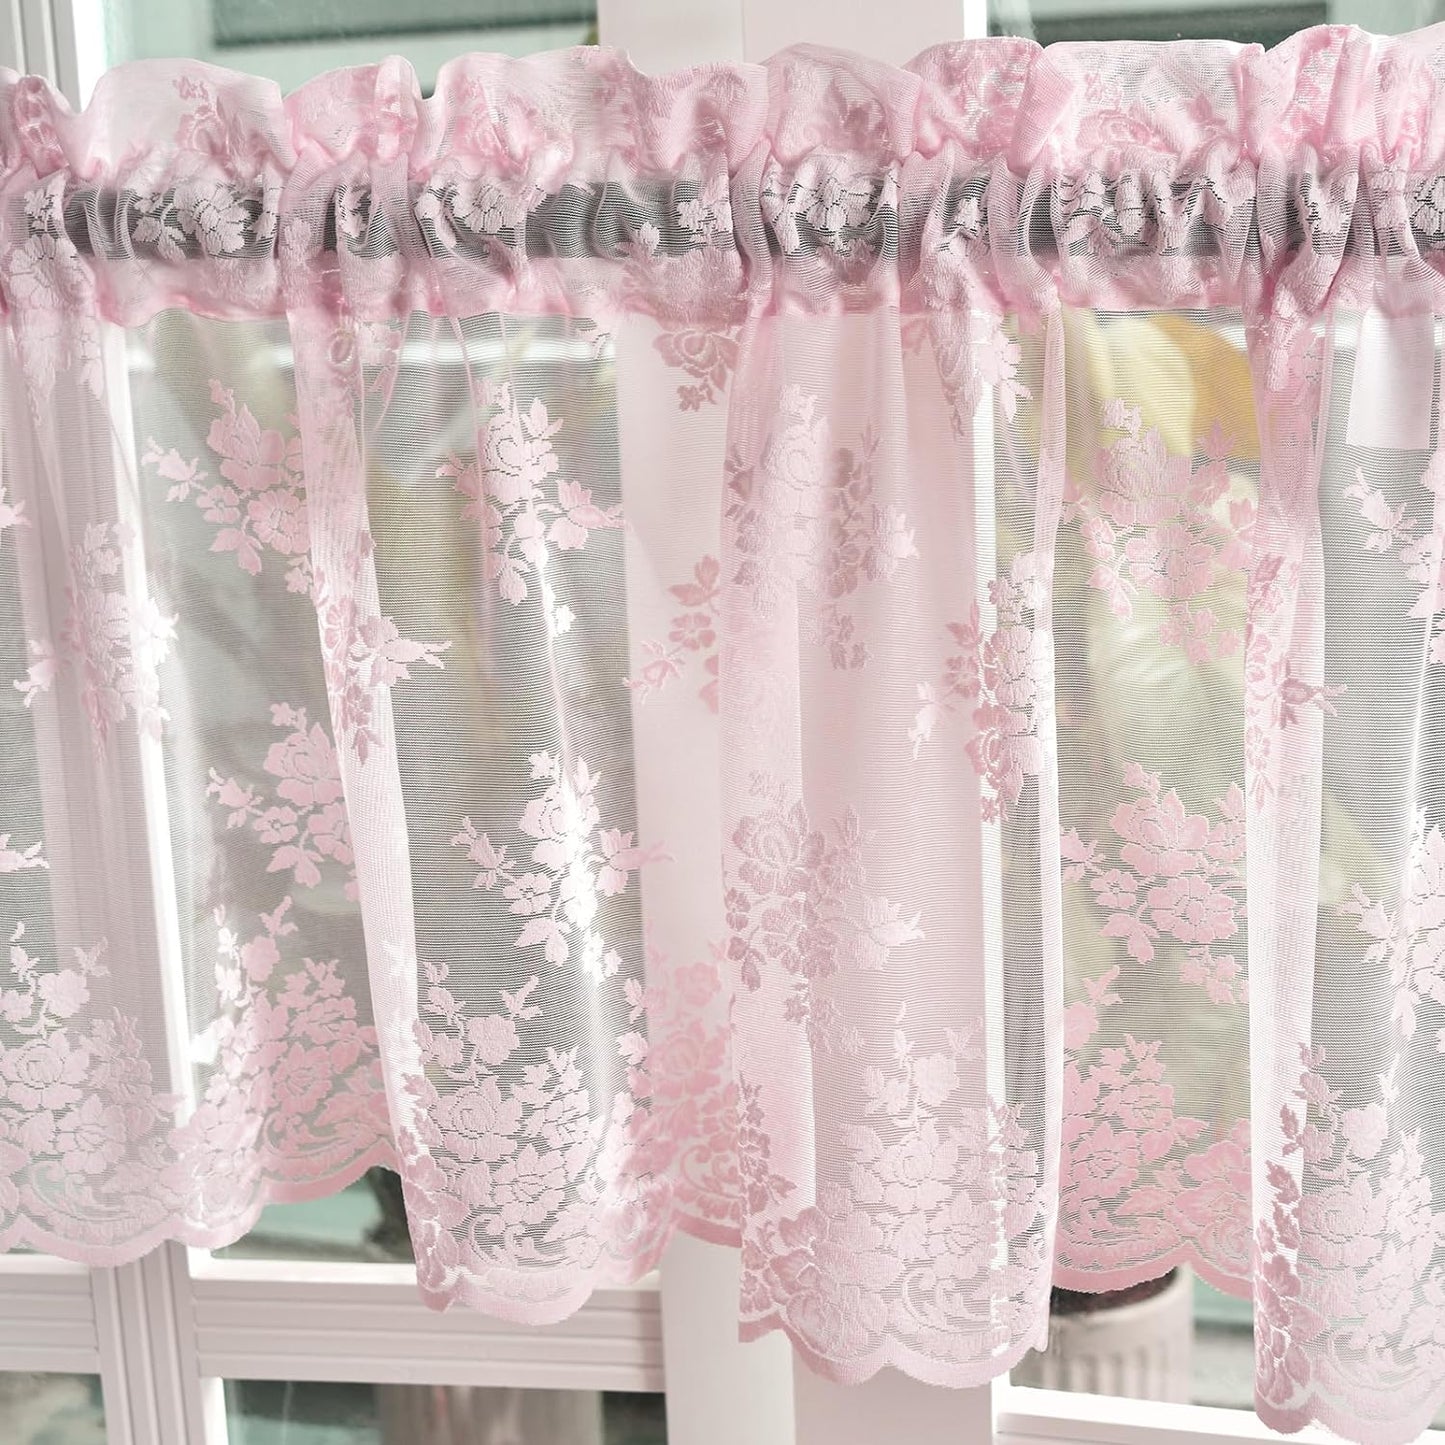 Kotile Sage Green Sheer Valance Curtain for Windows, Rustic Floral Spring Sheer Window Valance Curtain 18 Inch Length, Light Filtering Rod Pocket Lace Valance, 52 X 18 Inch, 1 Panel, Sage Green  Kotile Textile Pink 52 In X 18 In (W X L) 